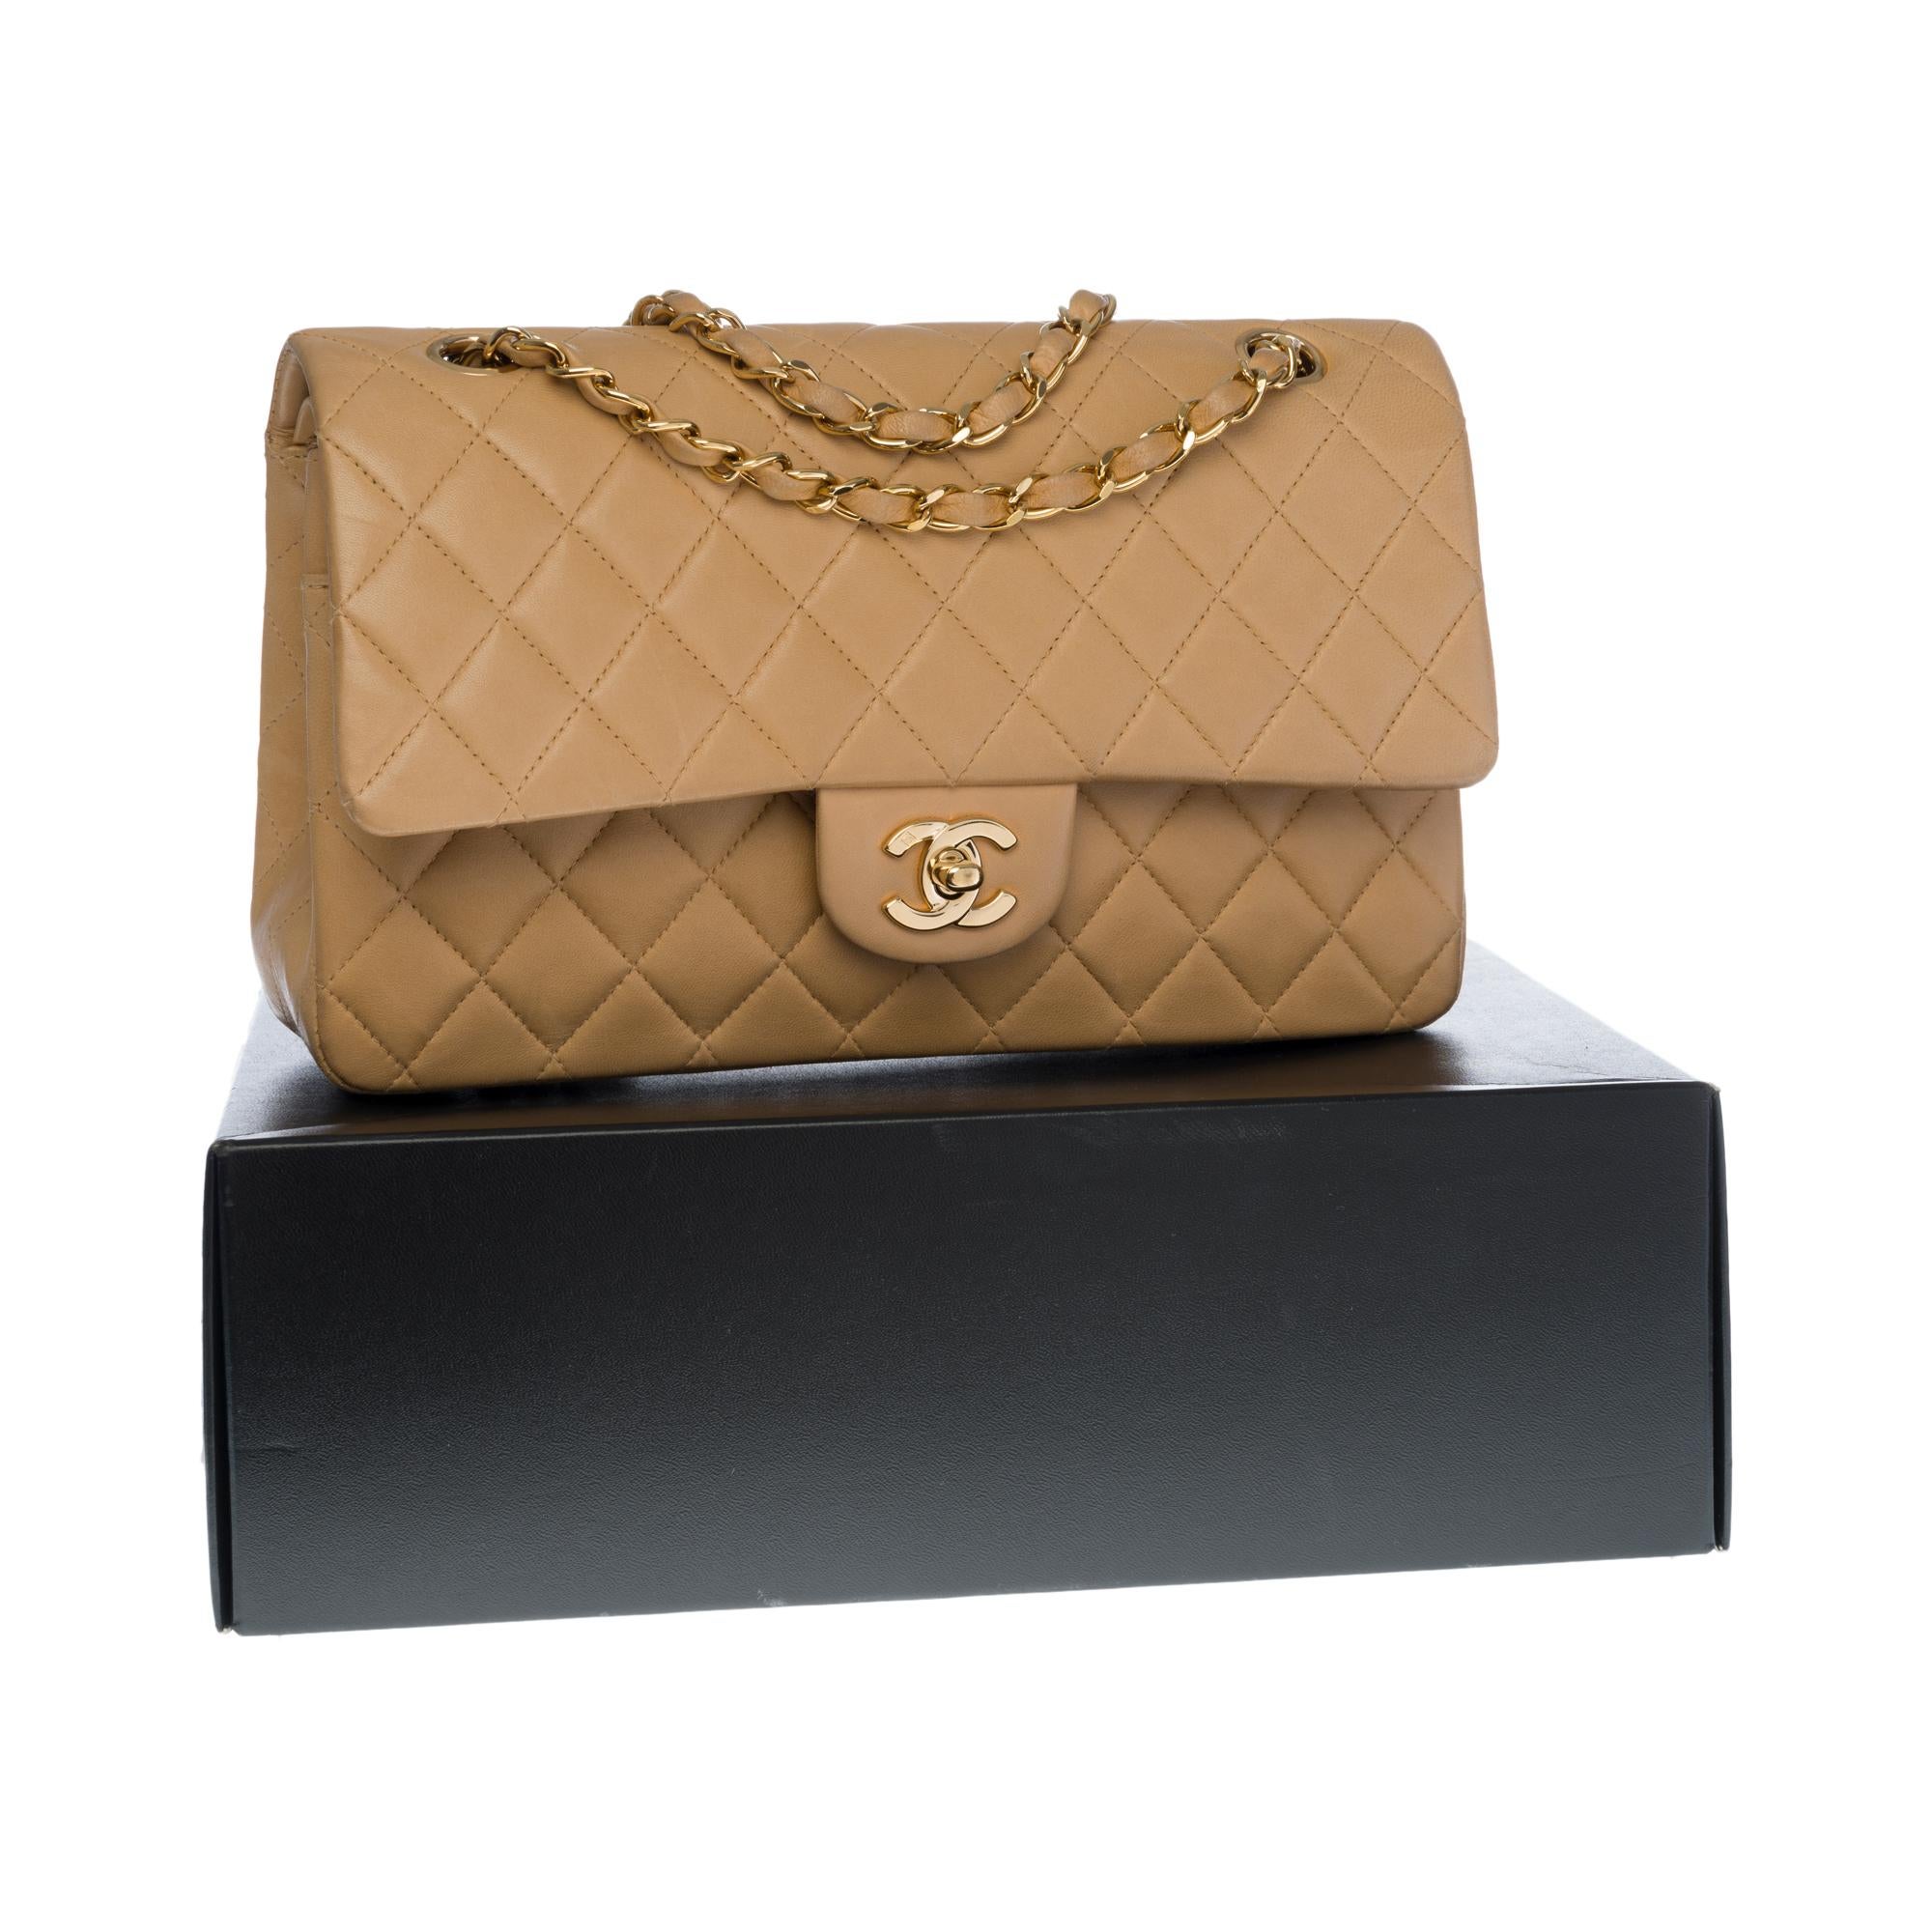 Chanel Timeless double flap Medium Shoulder bag in beige quilted leather, GHW 6